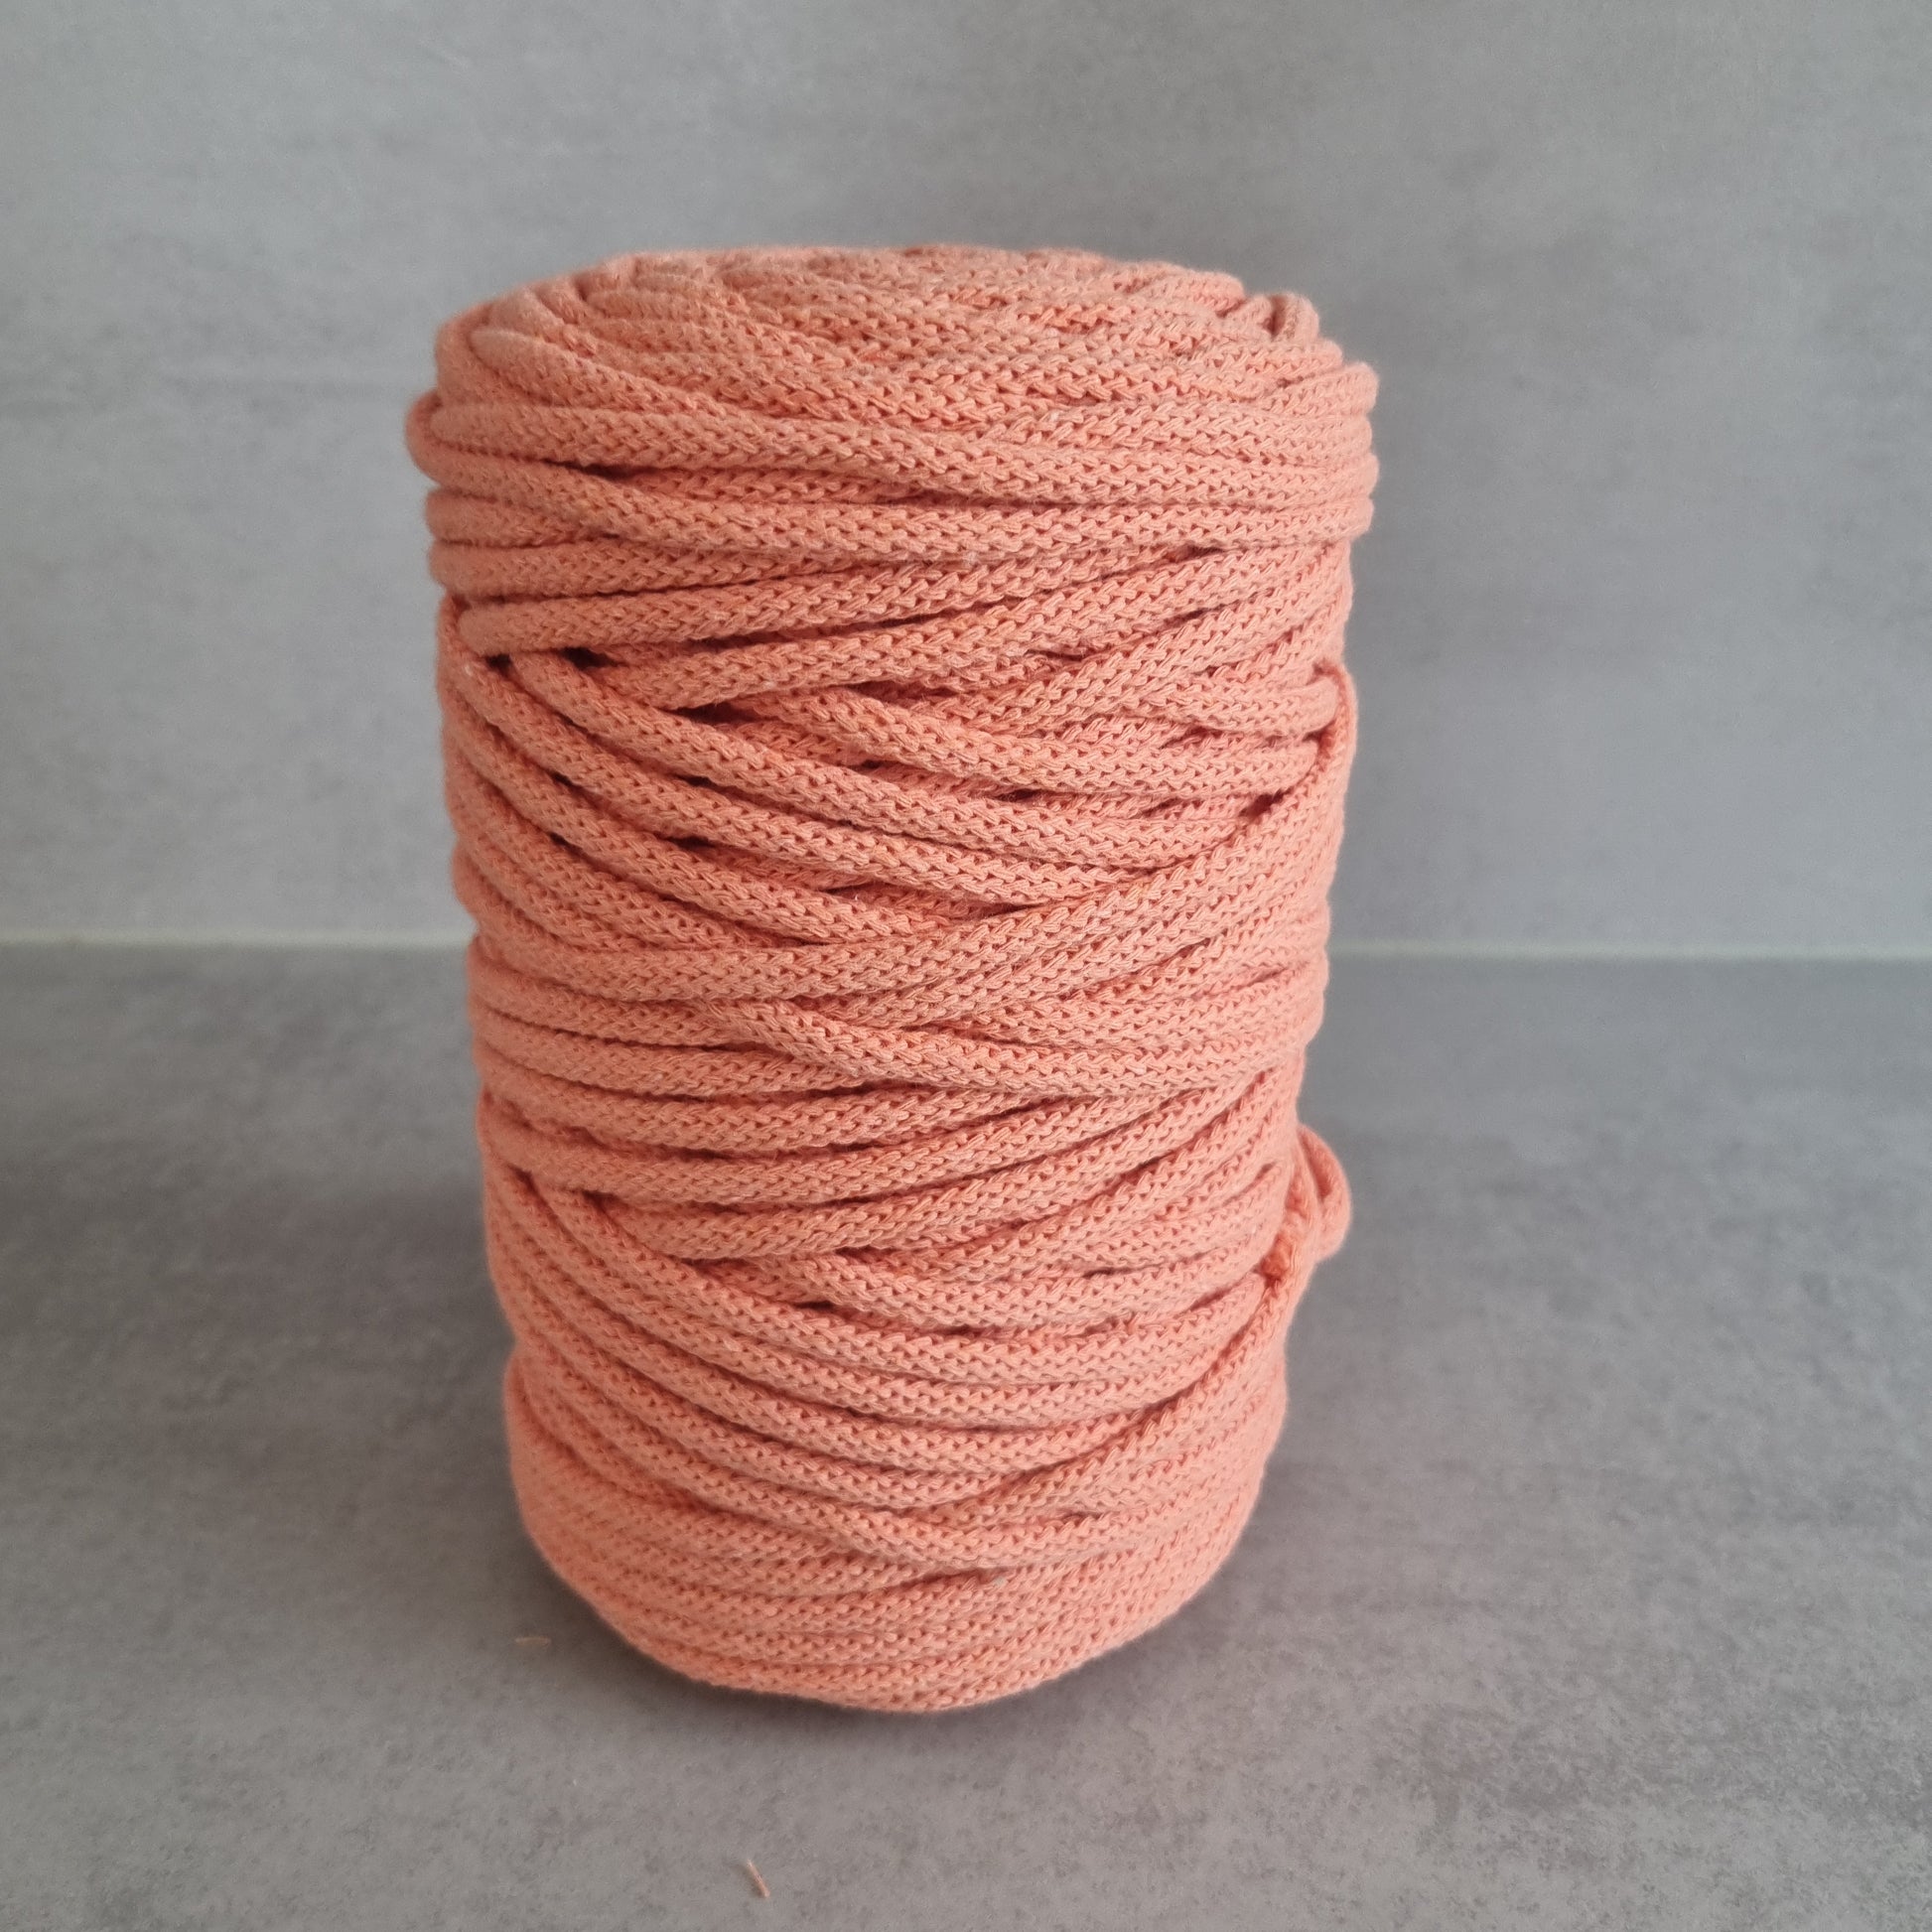  XKDOUS Macrame Cord 6mm x 75Yards, Natural Cotton